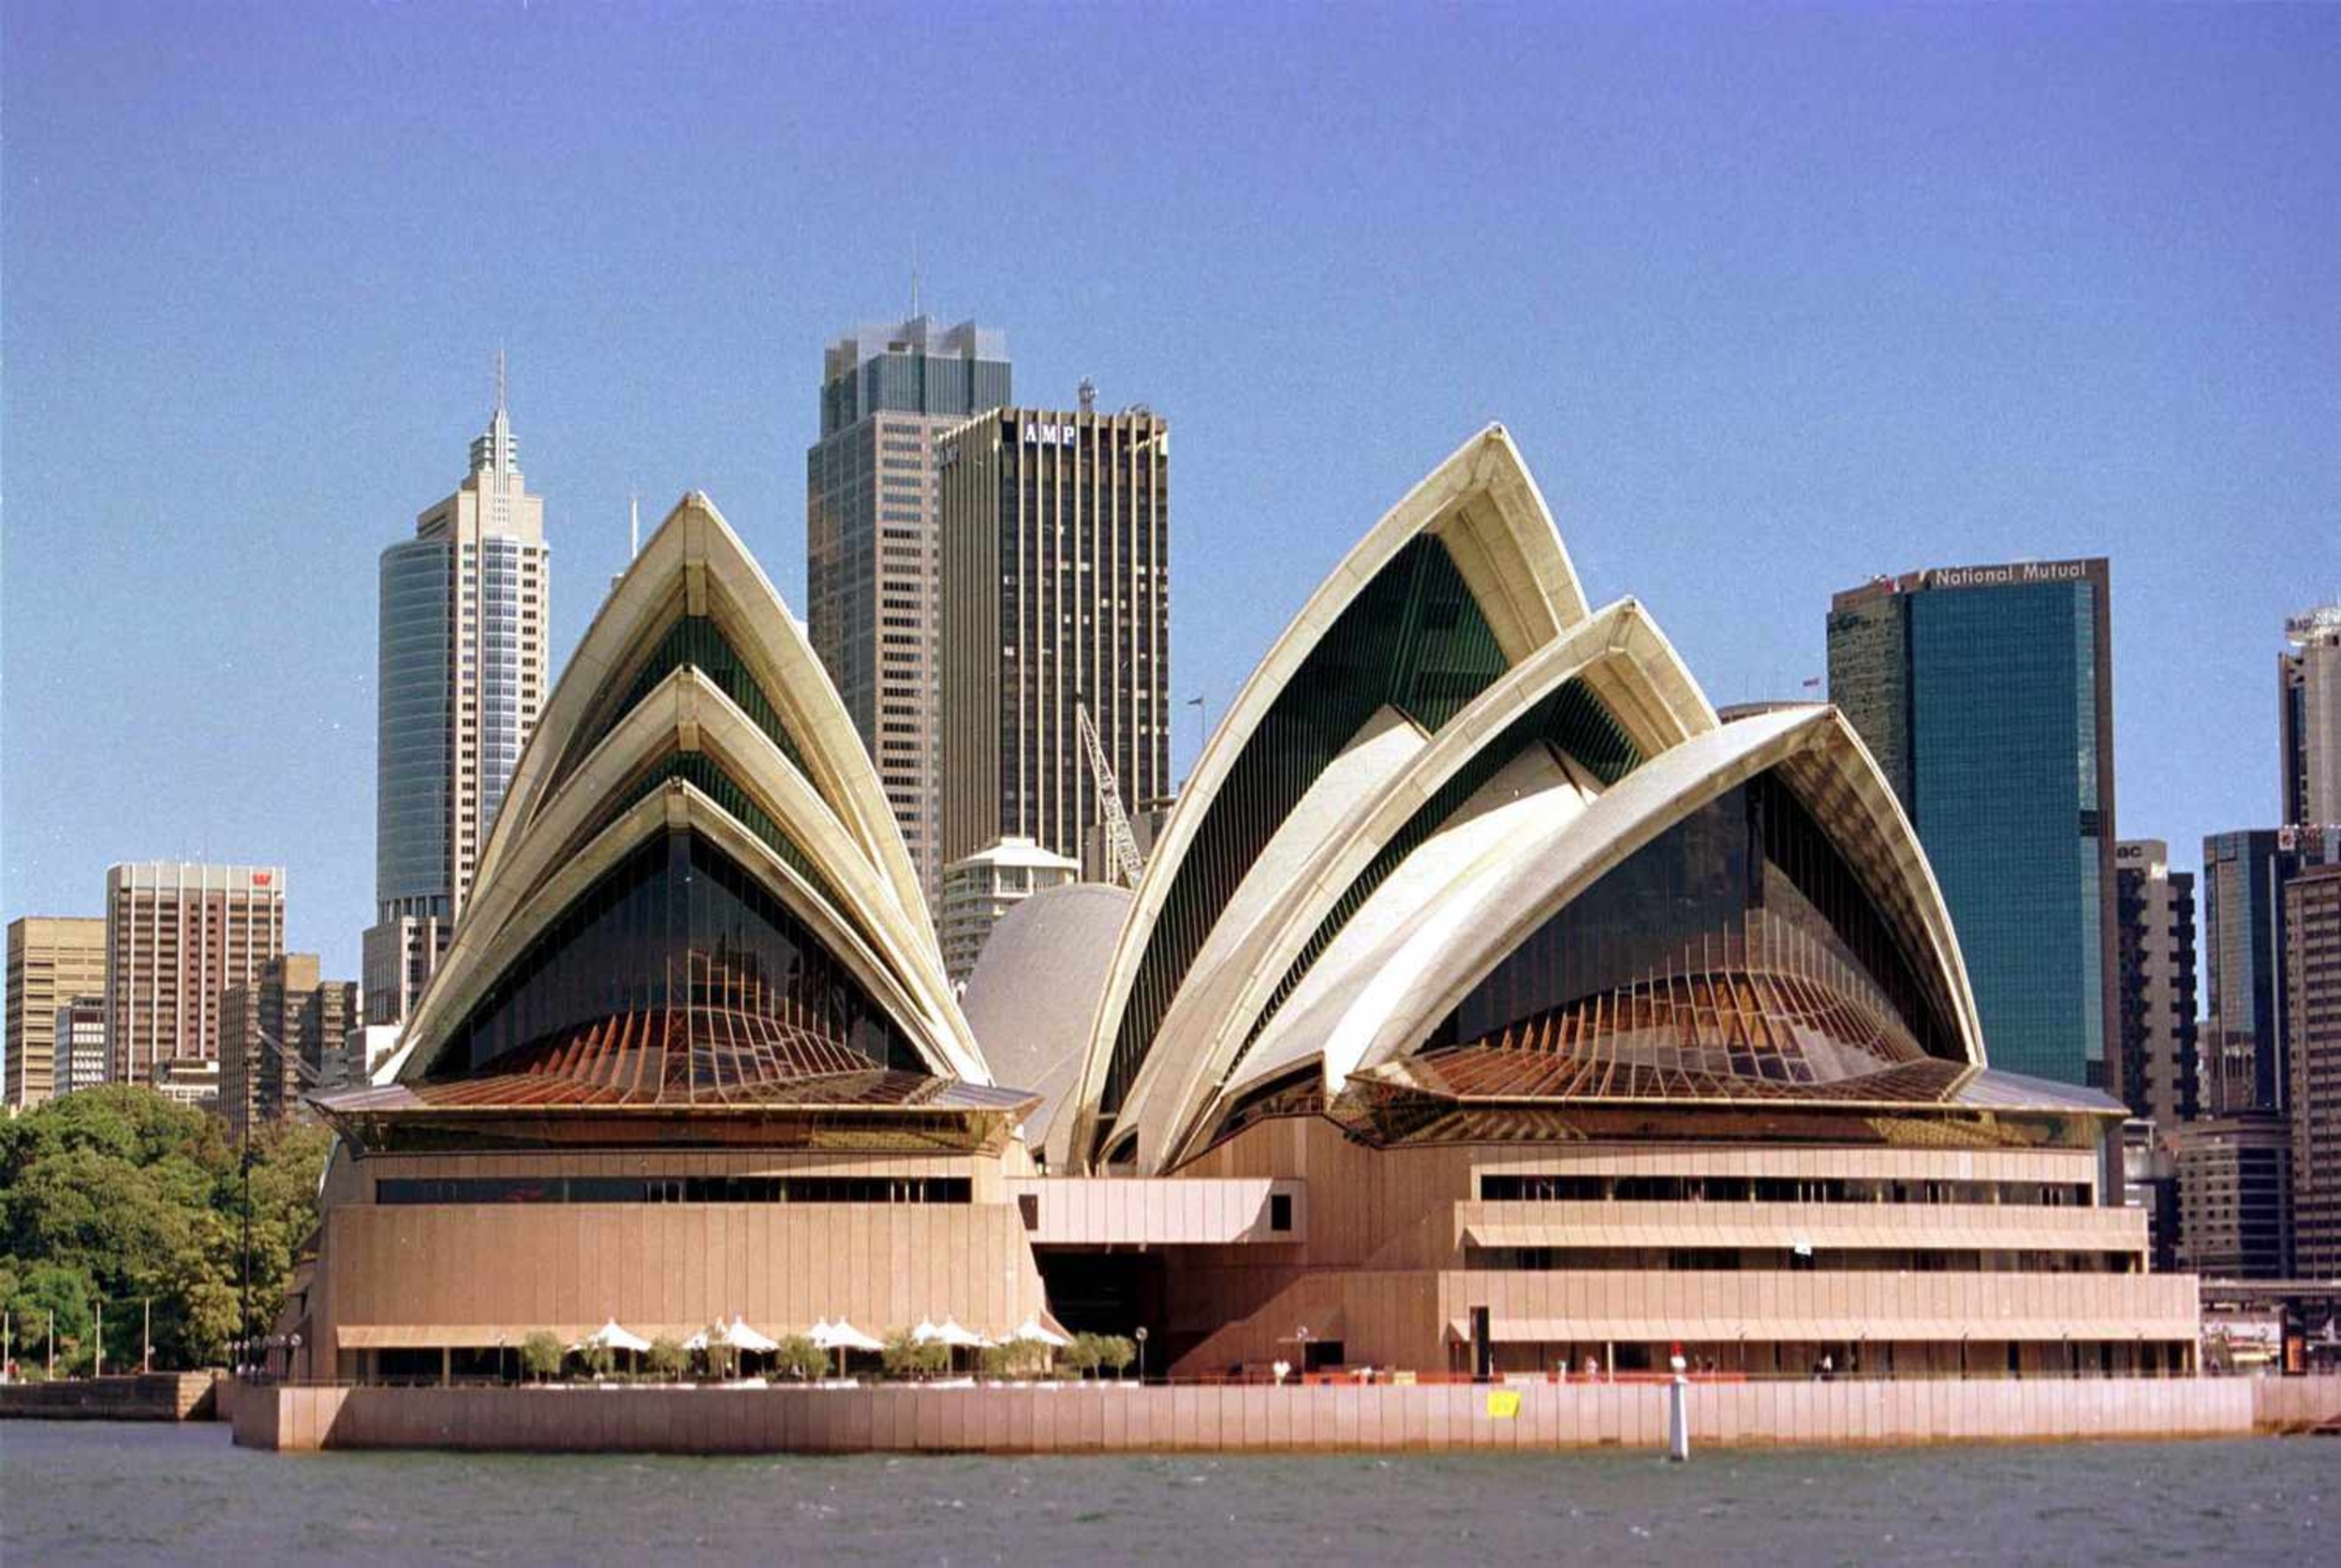 <p>If you know anything about Sydney, it's no surprise that the Opera House is on our list. The most iconic building in Sydney is an architectural marvel with a roof that looks like a fruit being peeled. More than that, it's a space for some of the city's coolest events. Catch a show or marvel at the harbor views. There's always something interesting going on at the Opera House.</p><p><a href='https://www.msn.com/en-us/community/channel/vid-cj9pqbr0vn9in2b6ddcd8sfgpfq6x6utp44fssrv6mc2gtybw0us'>Follow us on MSN to see more of our exclusive lifestyle content.</a></p>